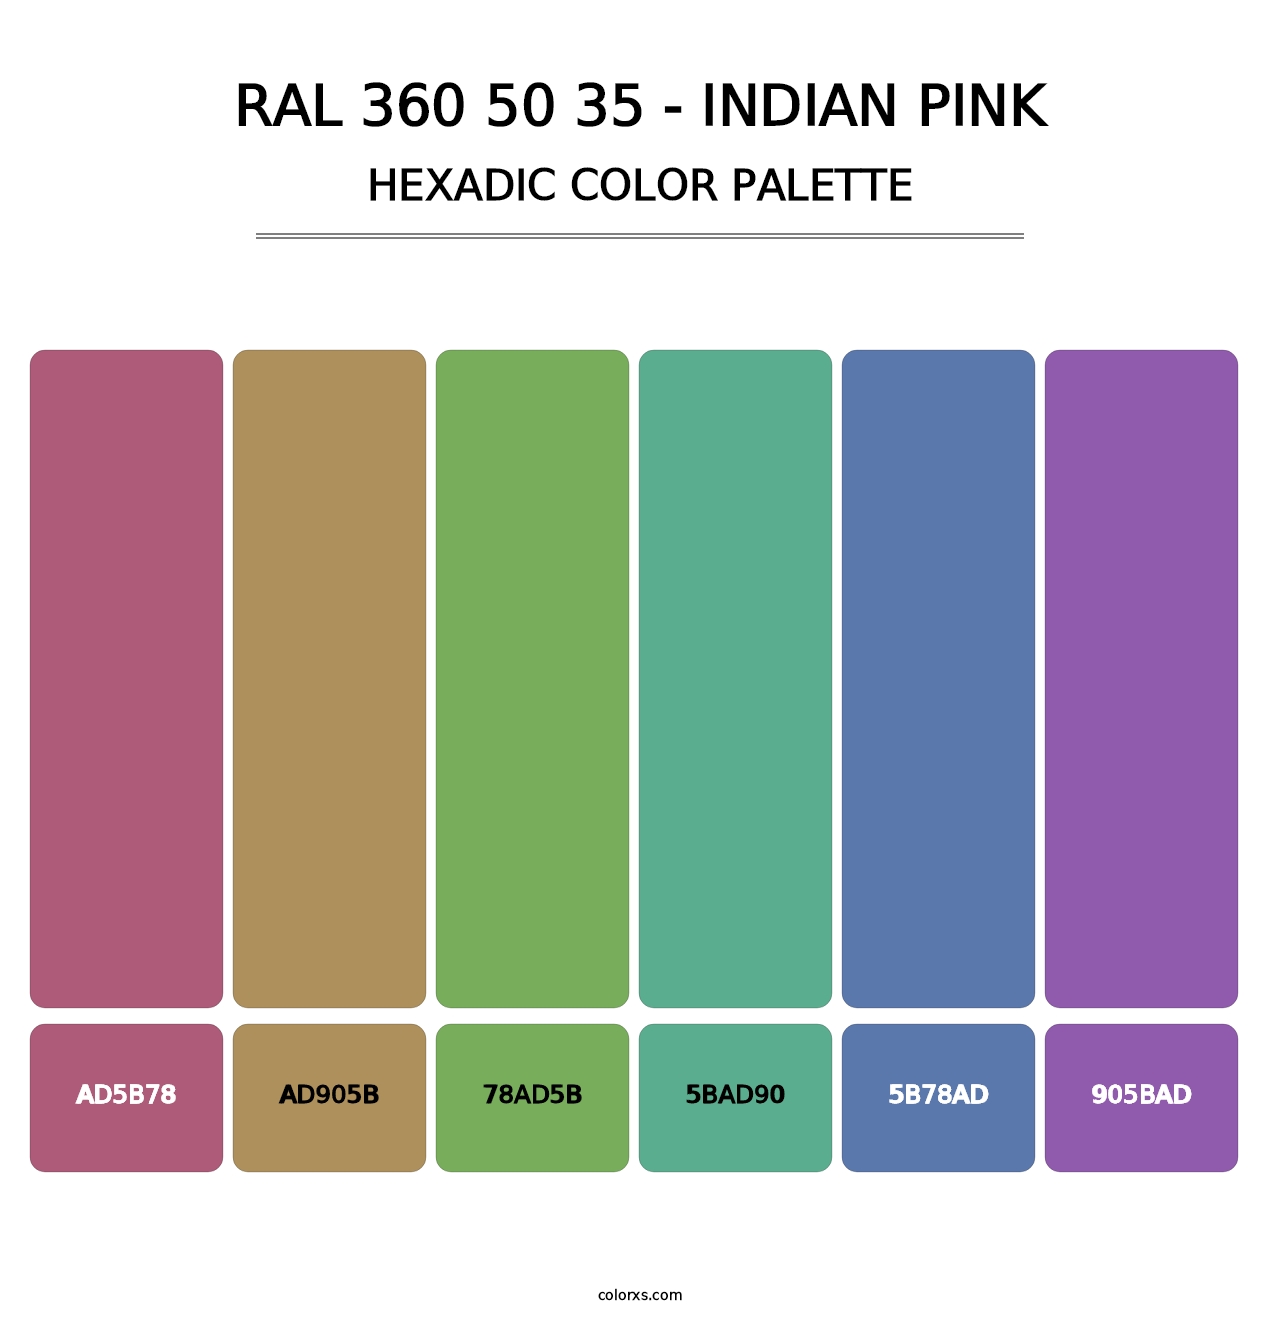 RAL 360 50 35 - Indian Pink - Hexadic Color Palette